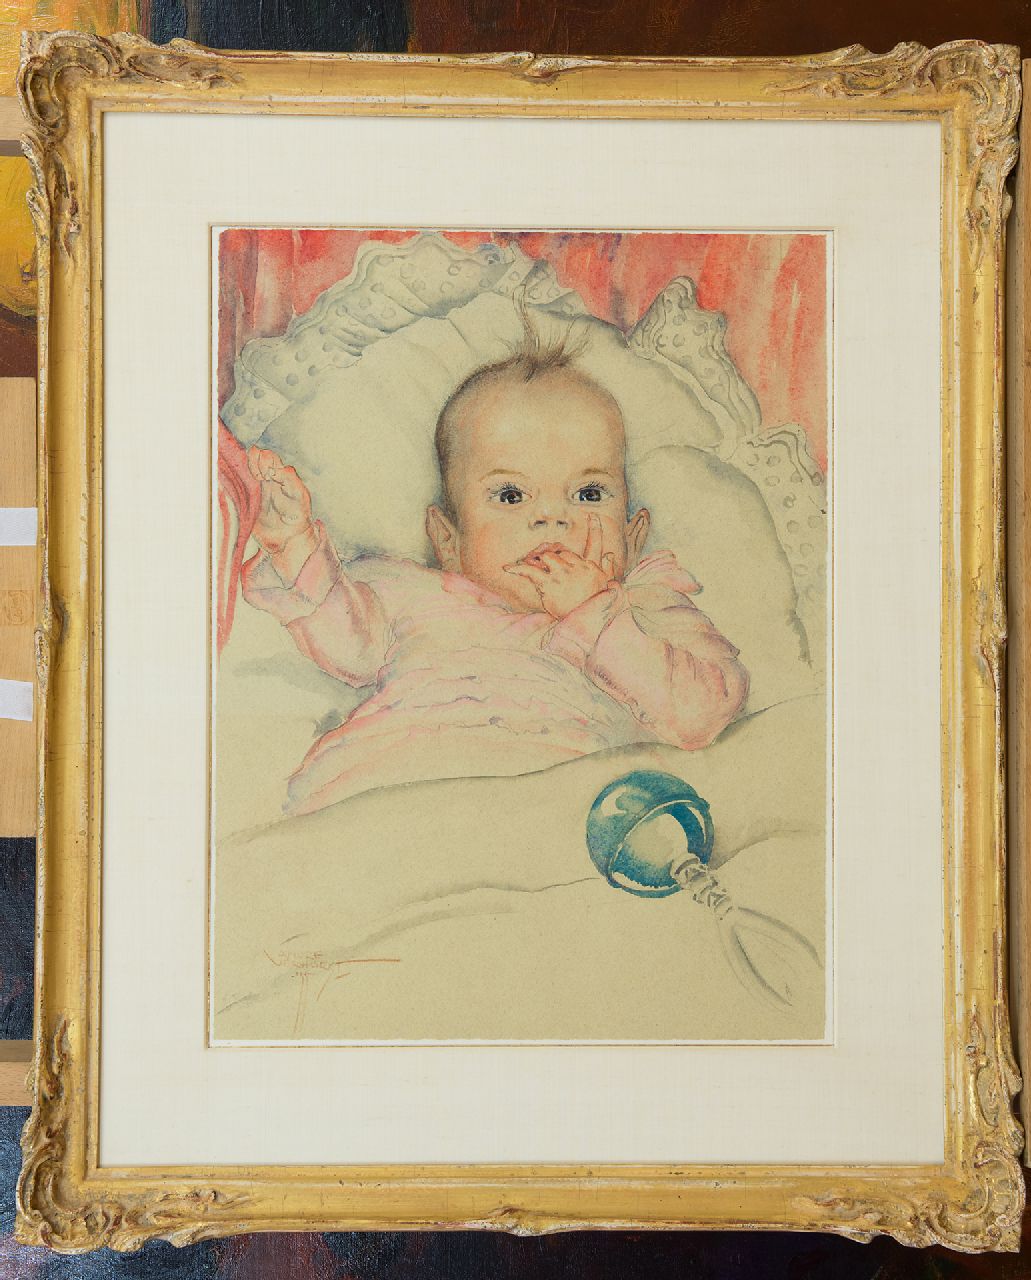 Verhorst A.J.  | Andreas Jacobus 'André J.' Verhorst | Watercolours and drawings offered for sale | A baby's portrait of Emmie Reijnders, pencil and watercolour on paper 44.5 x 33.5 cm, signed l.l. and dated '35